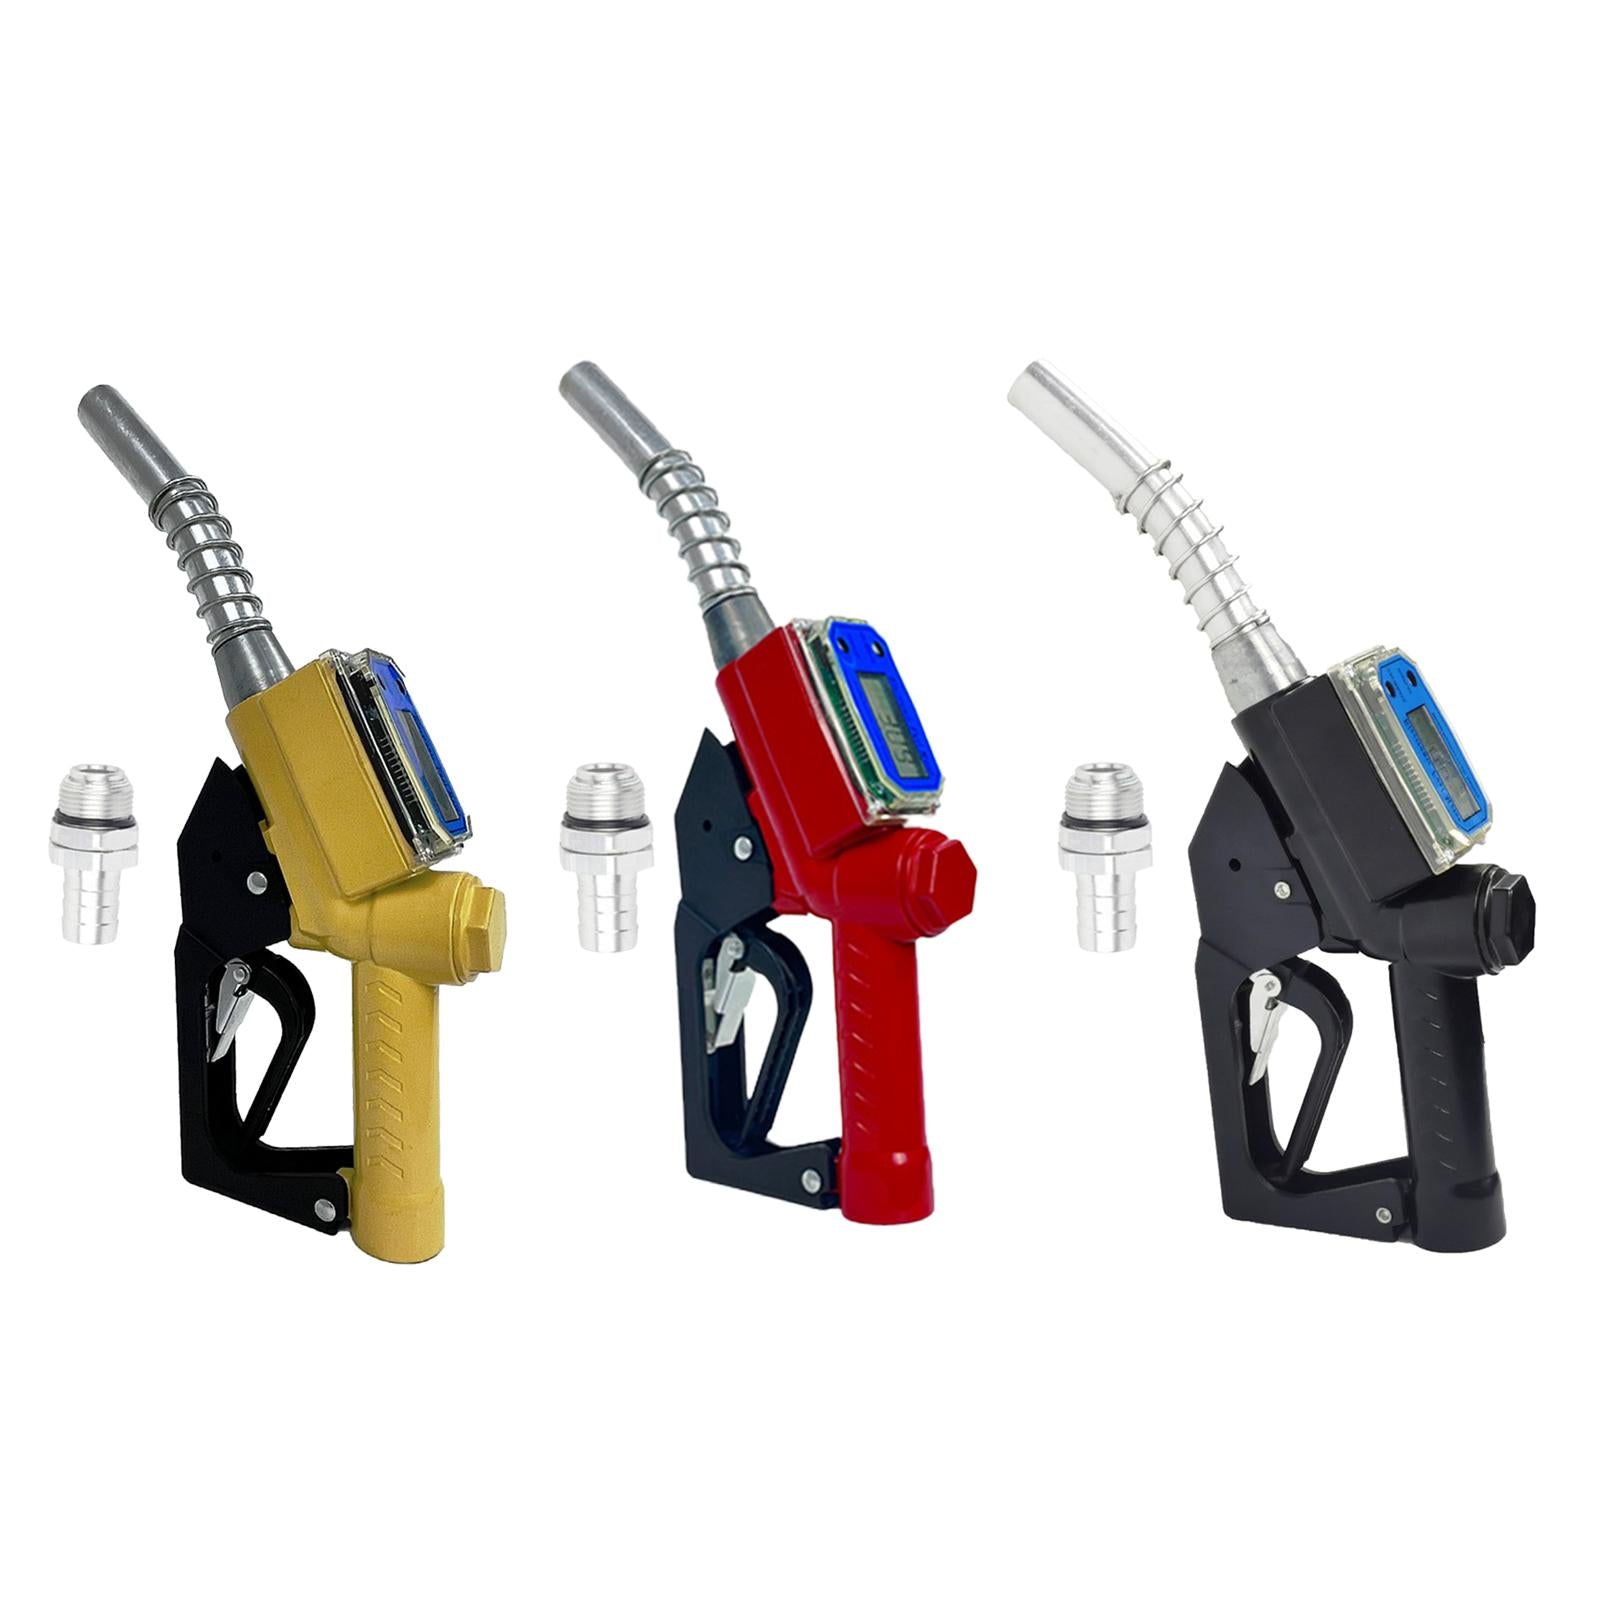 1 inch Manual Fueling Nozzle with Metering for Biodiesel Petrol Red